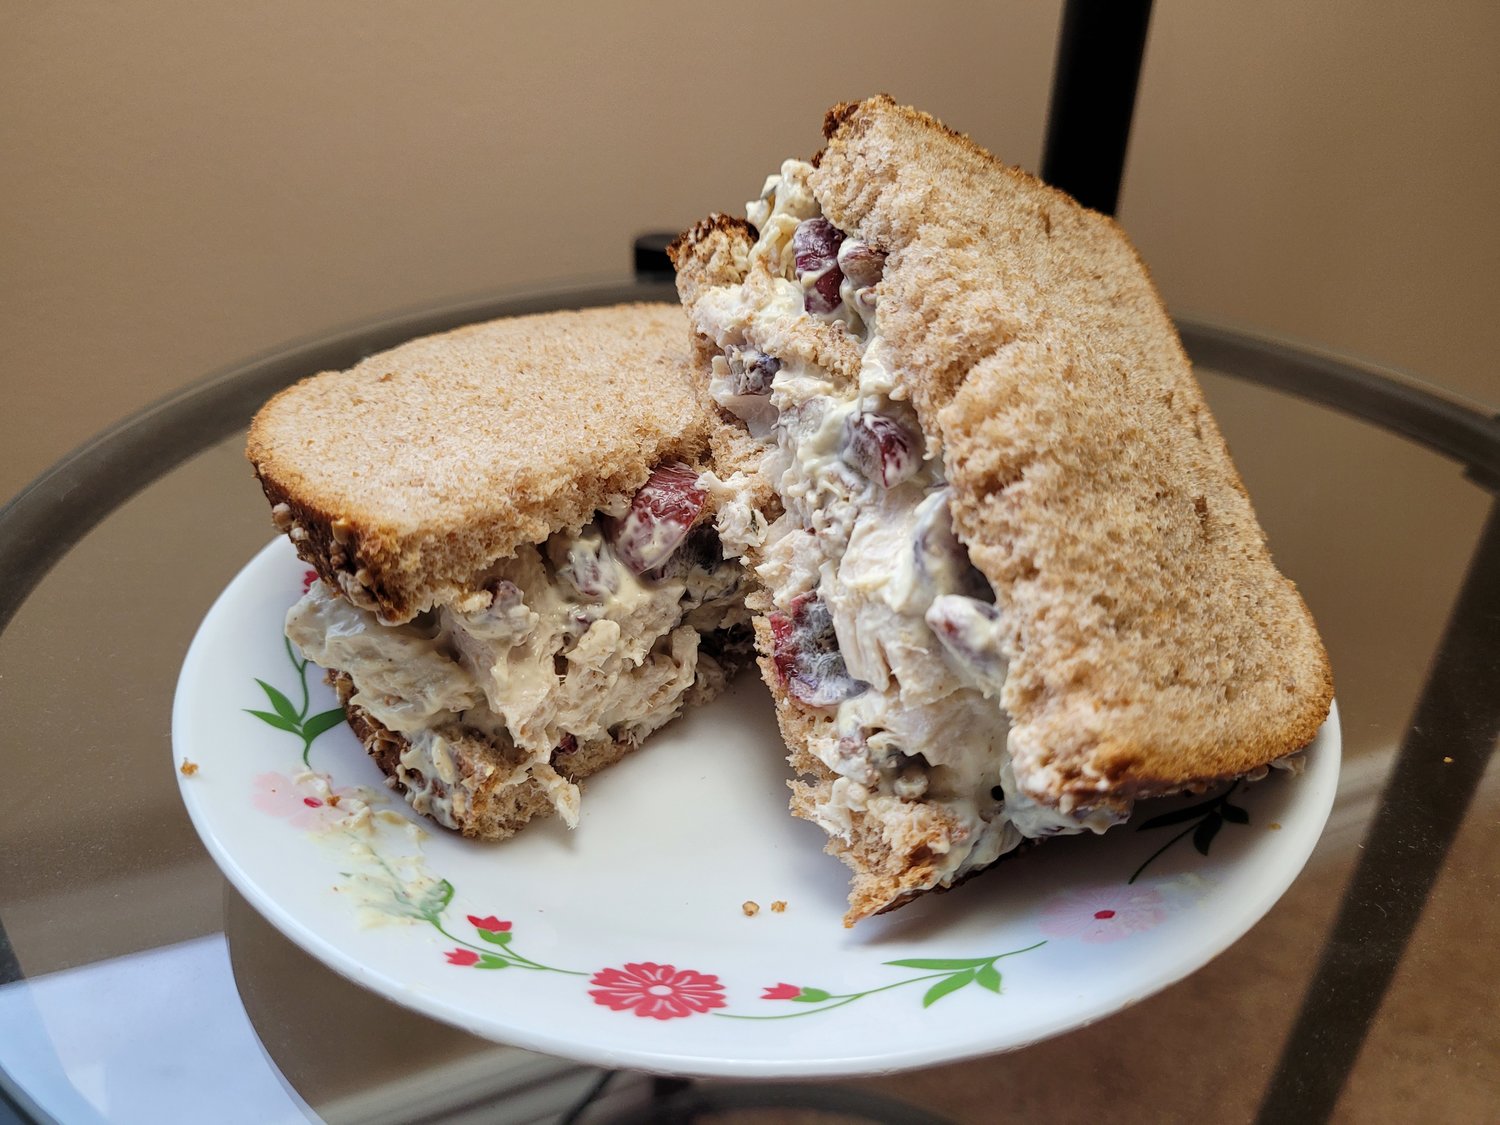 Chicken salad sandwiches are always better at the height of summer.